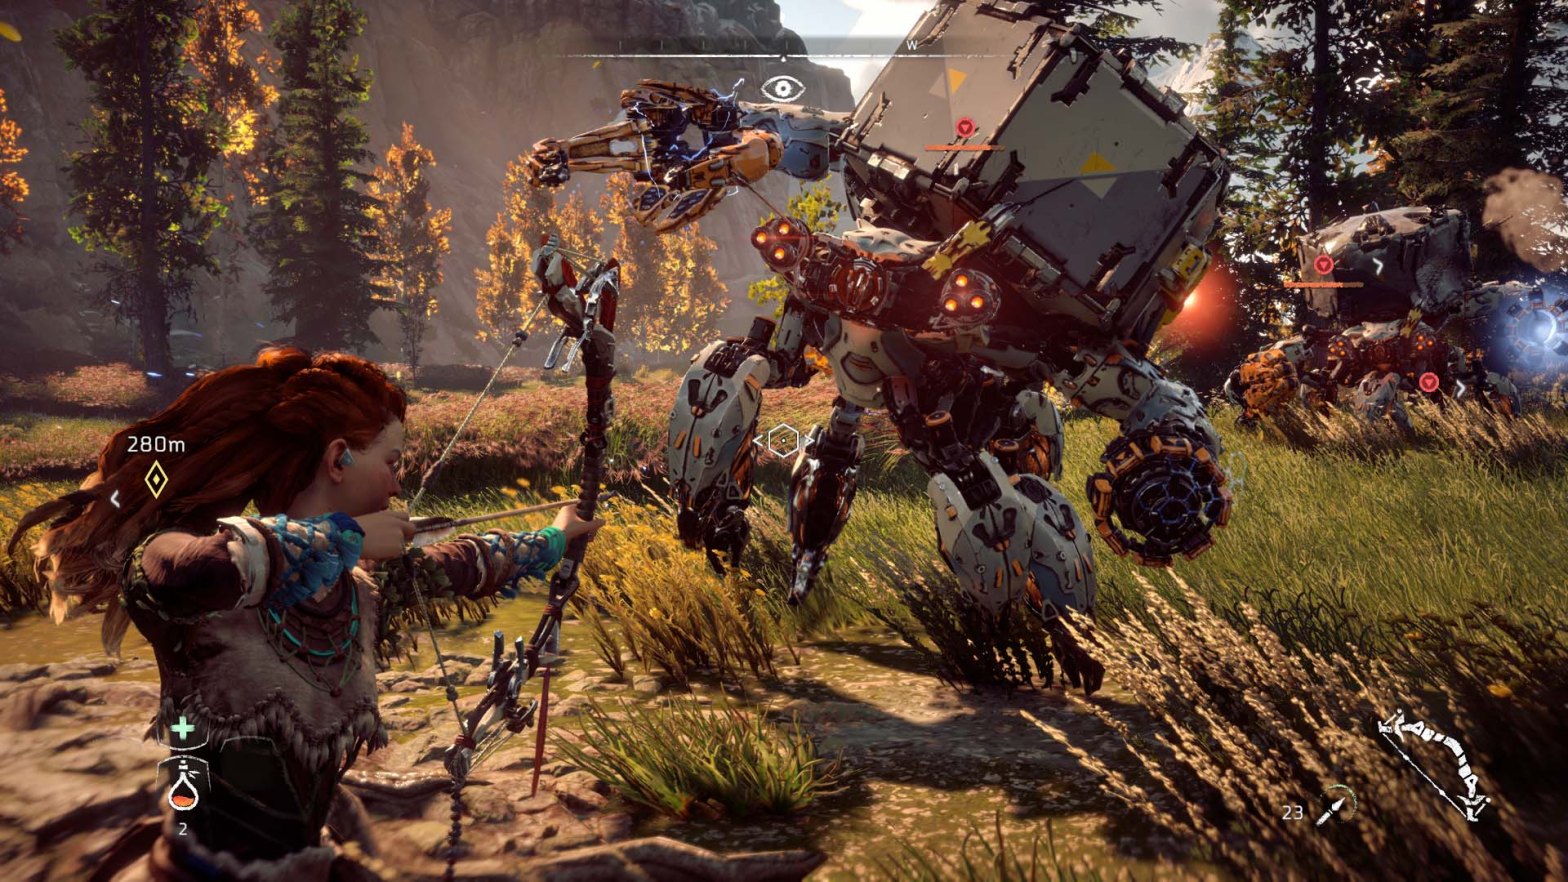 Check out 20 mins of “Horizon Zero Dawn” gameplay – Geeks with Kids